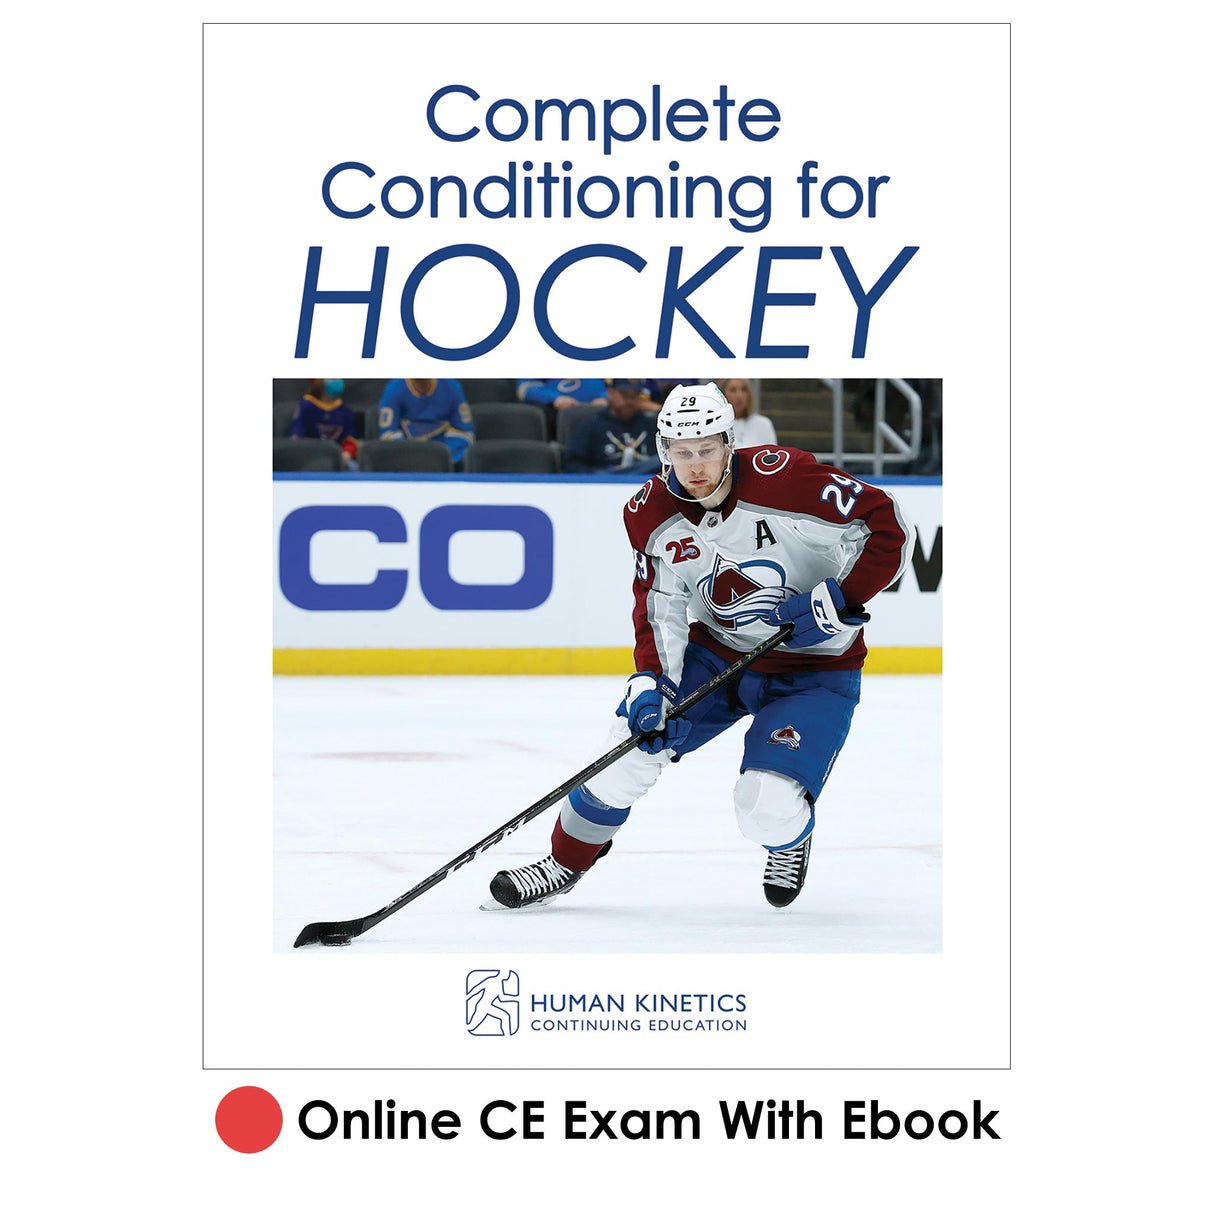 Complete Conditioning for Hockey Online CE Exam With Ebook